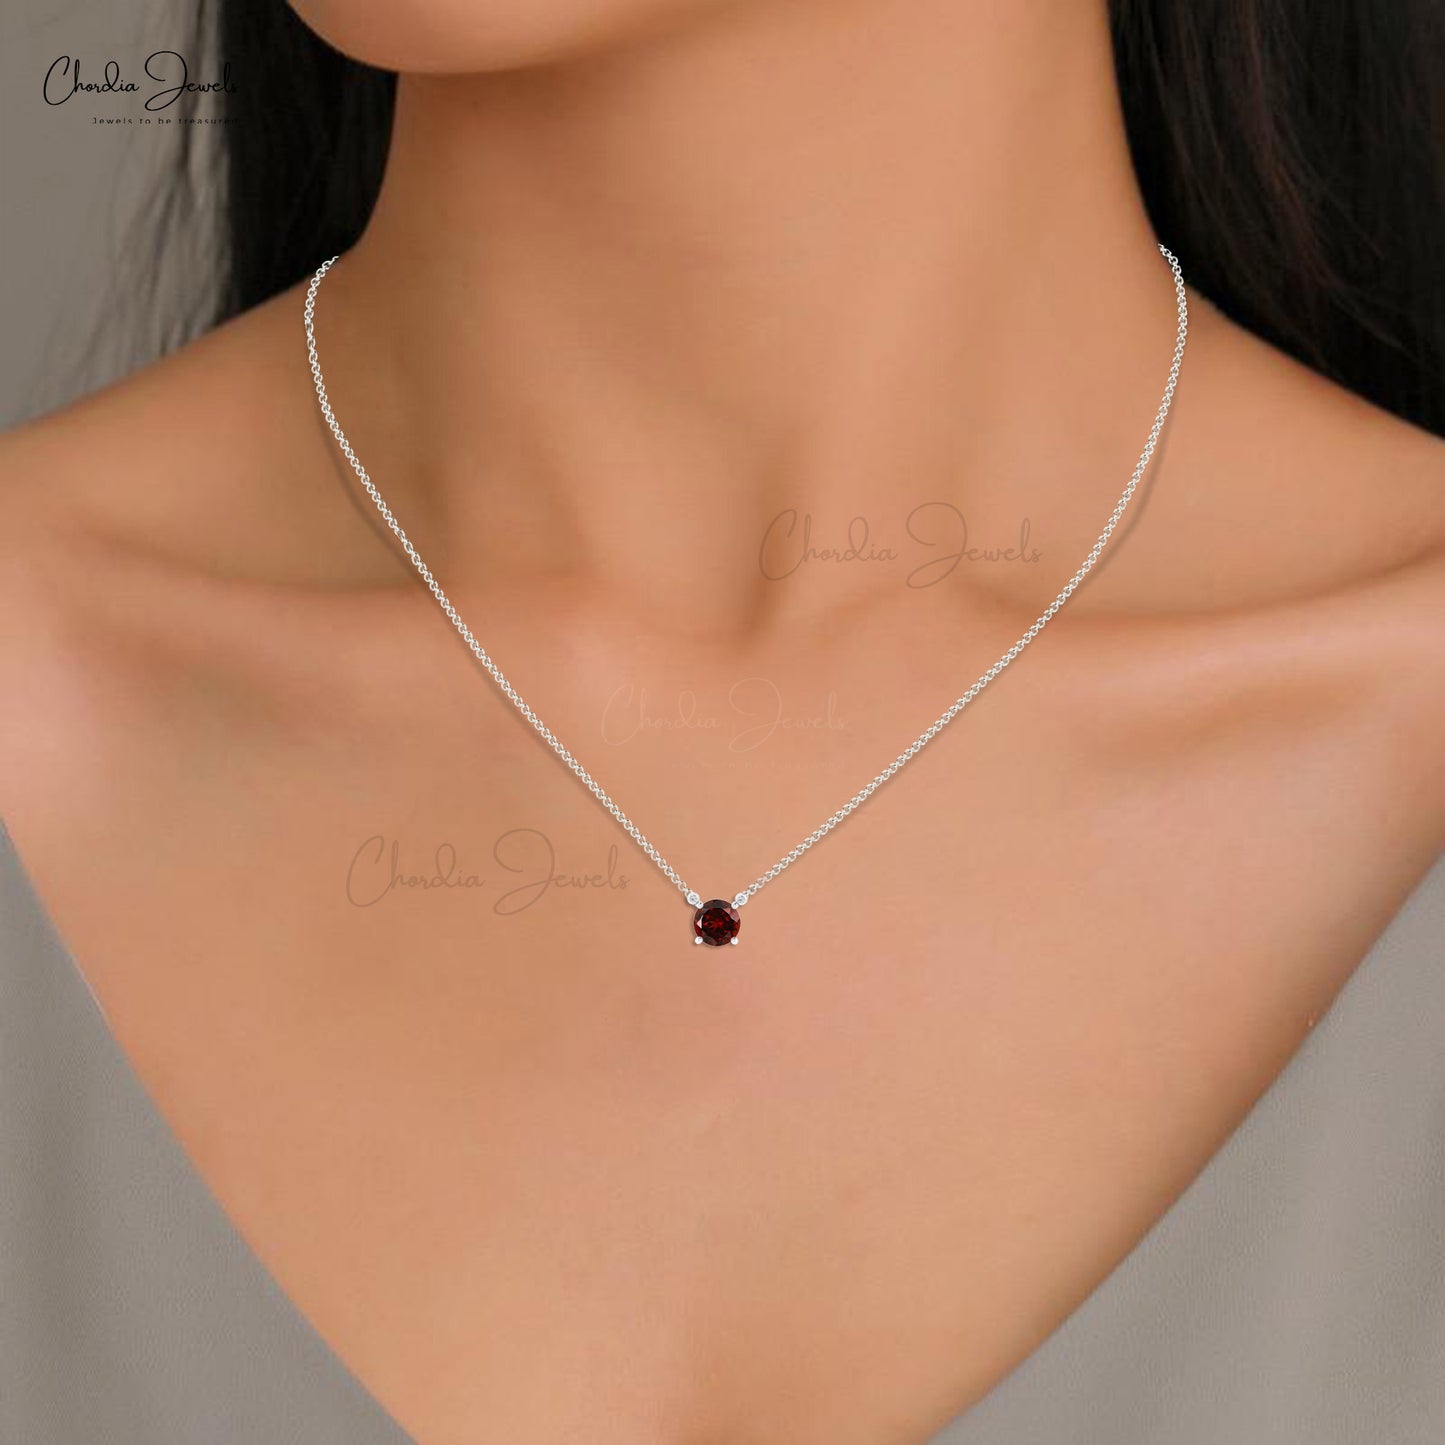 Load image into Gallery viewer, Authentic 1.08ct Garnet Solitaire Necklace 14k Real Gold Diamond Accented Delicate Necklace
